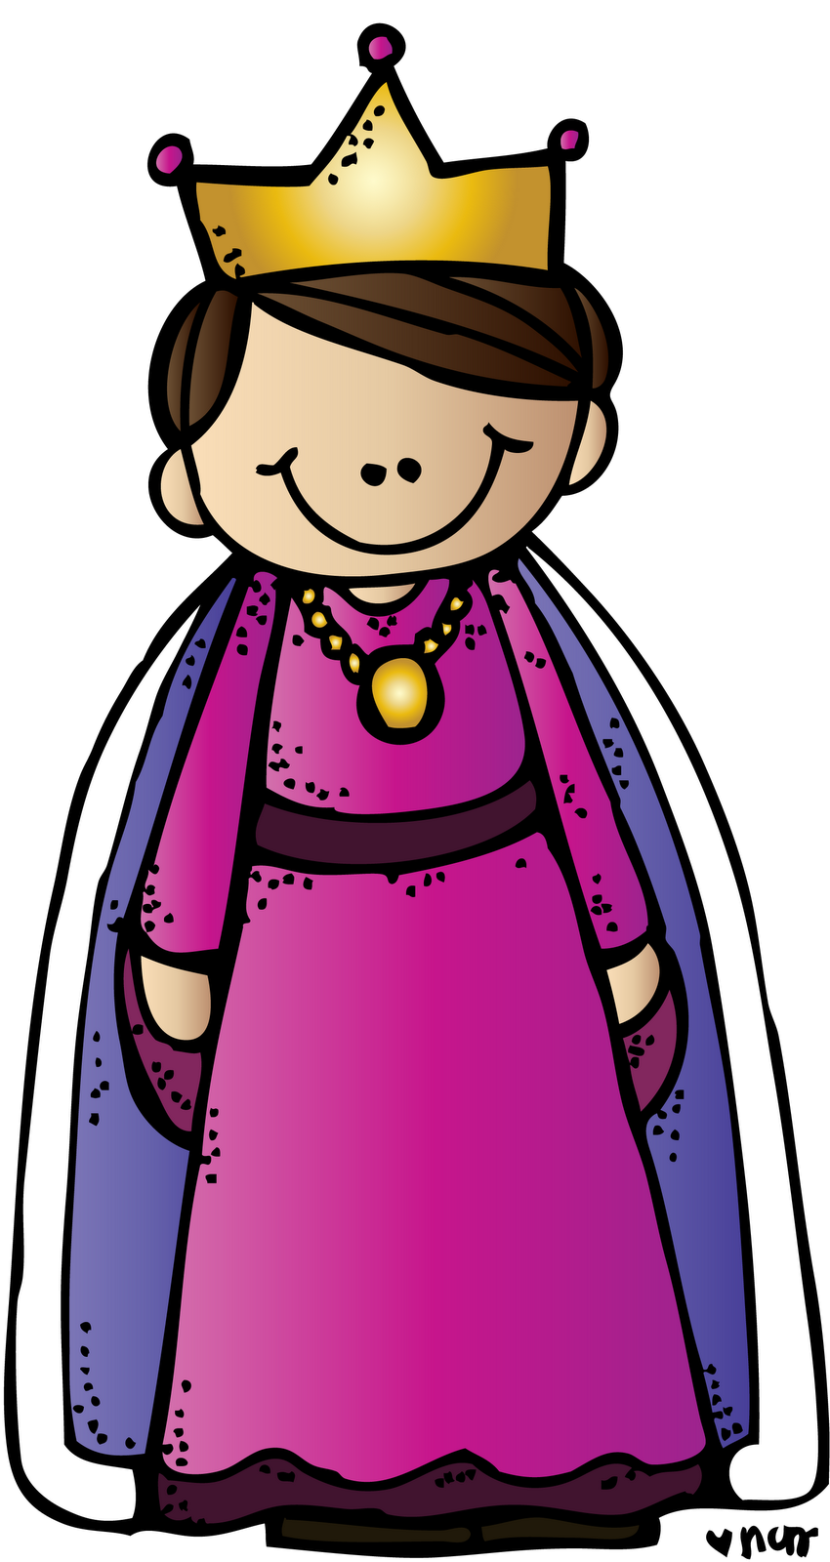 King with crown clipart 